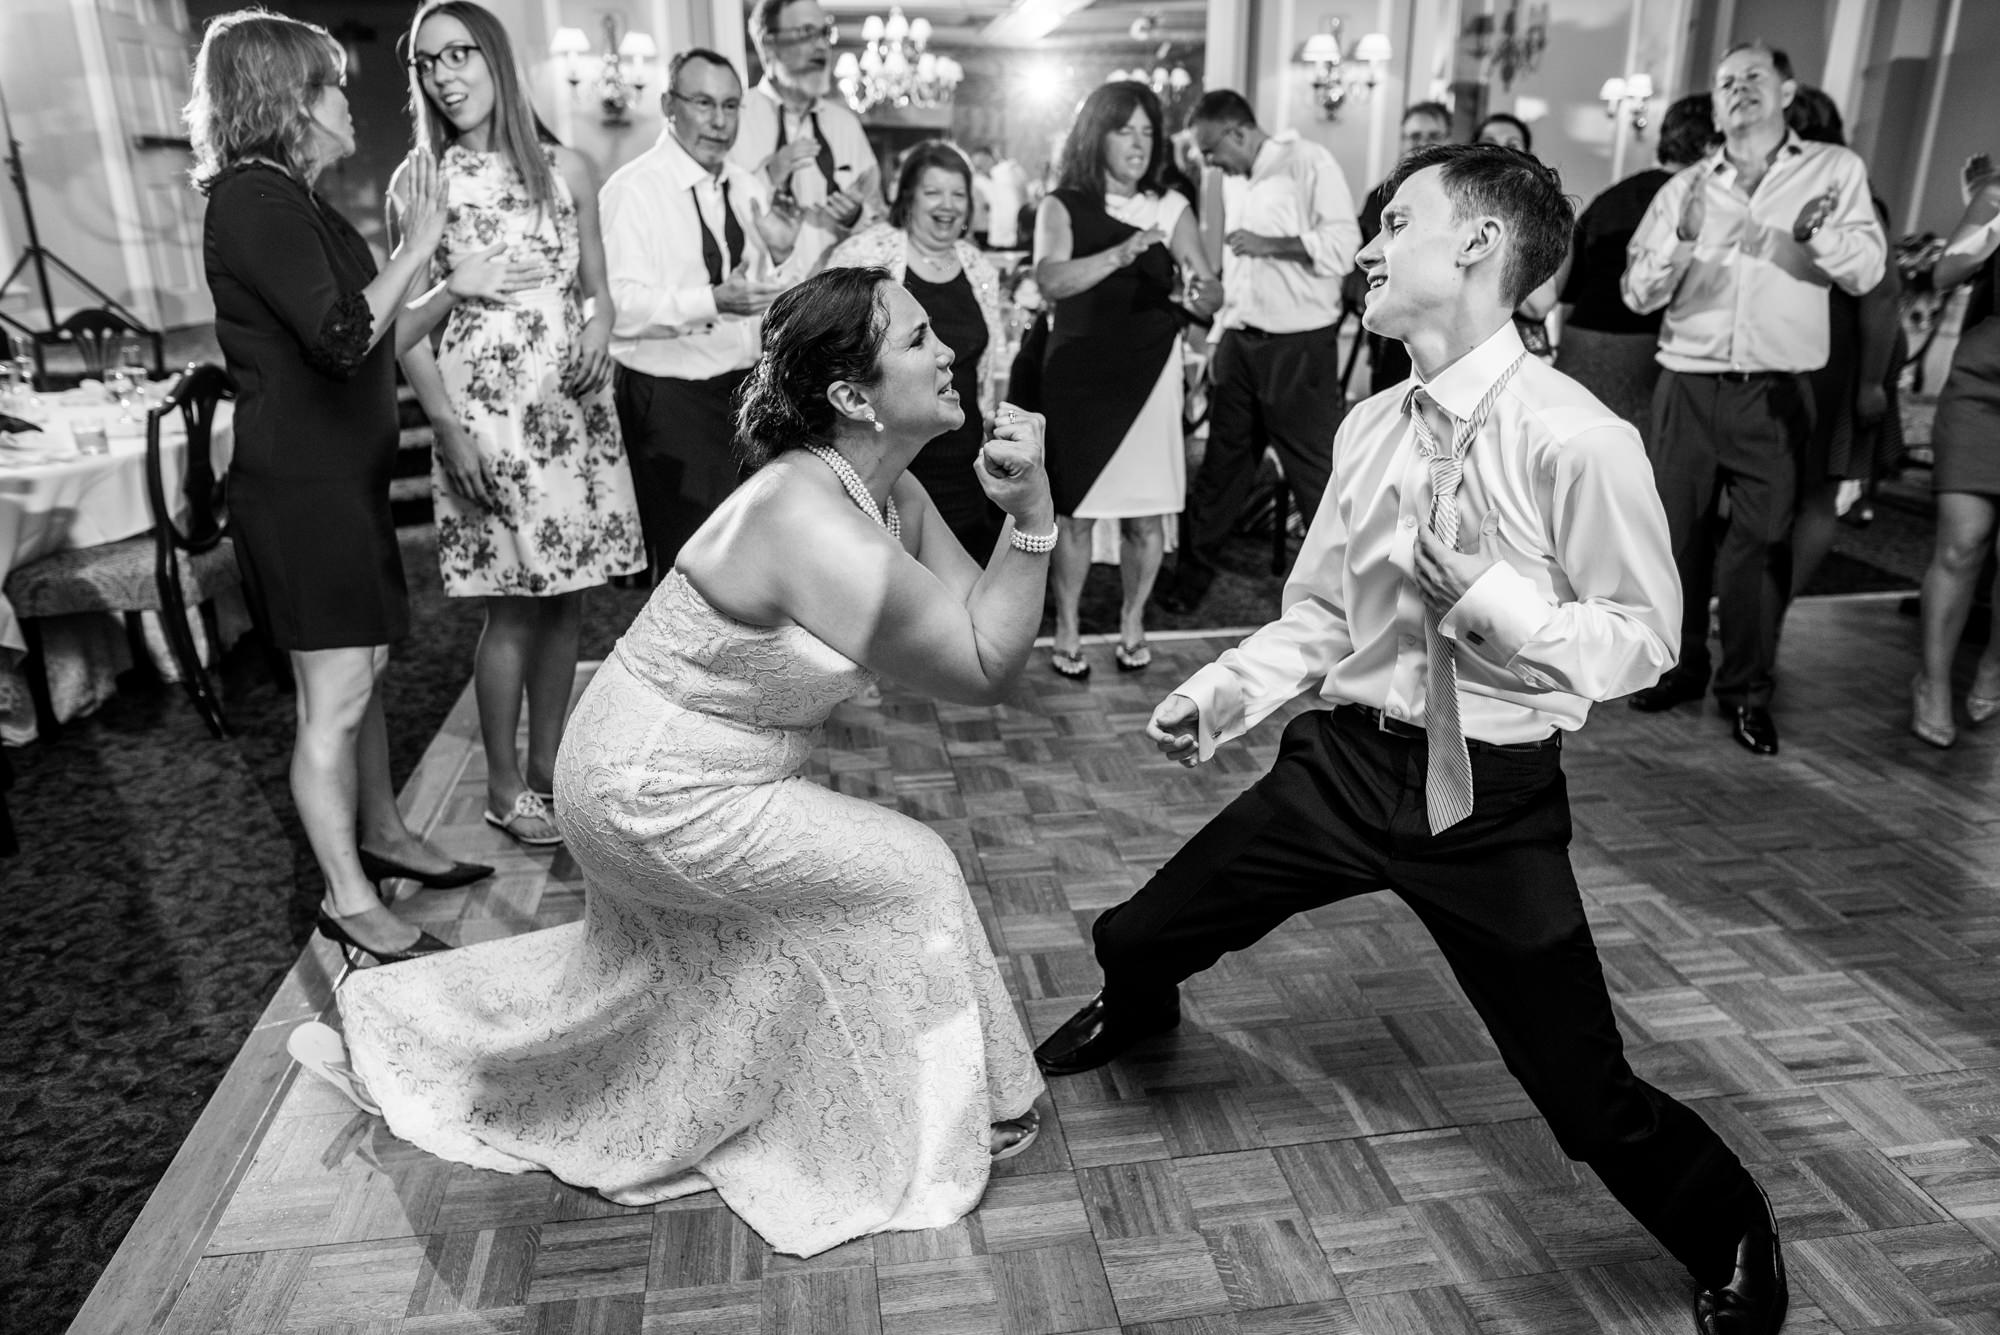 The happy couple dance into the night with their wedding guests at the Seattle Tennis Club, summer 2016. Photo by Seattle Wedding Photographers Jennifer Tai Photo Artistry.